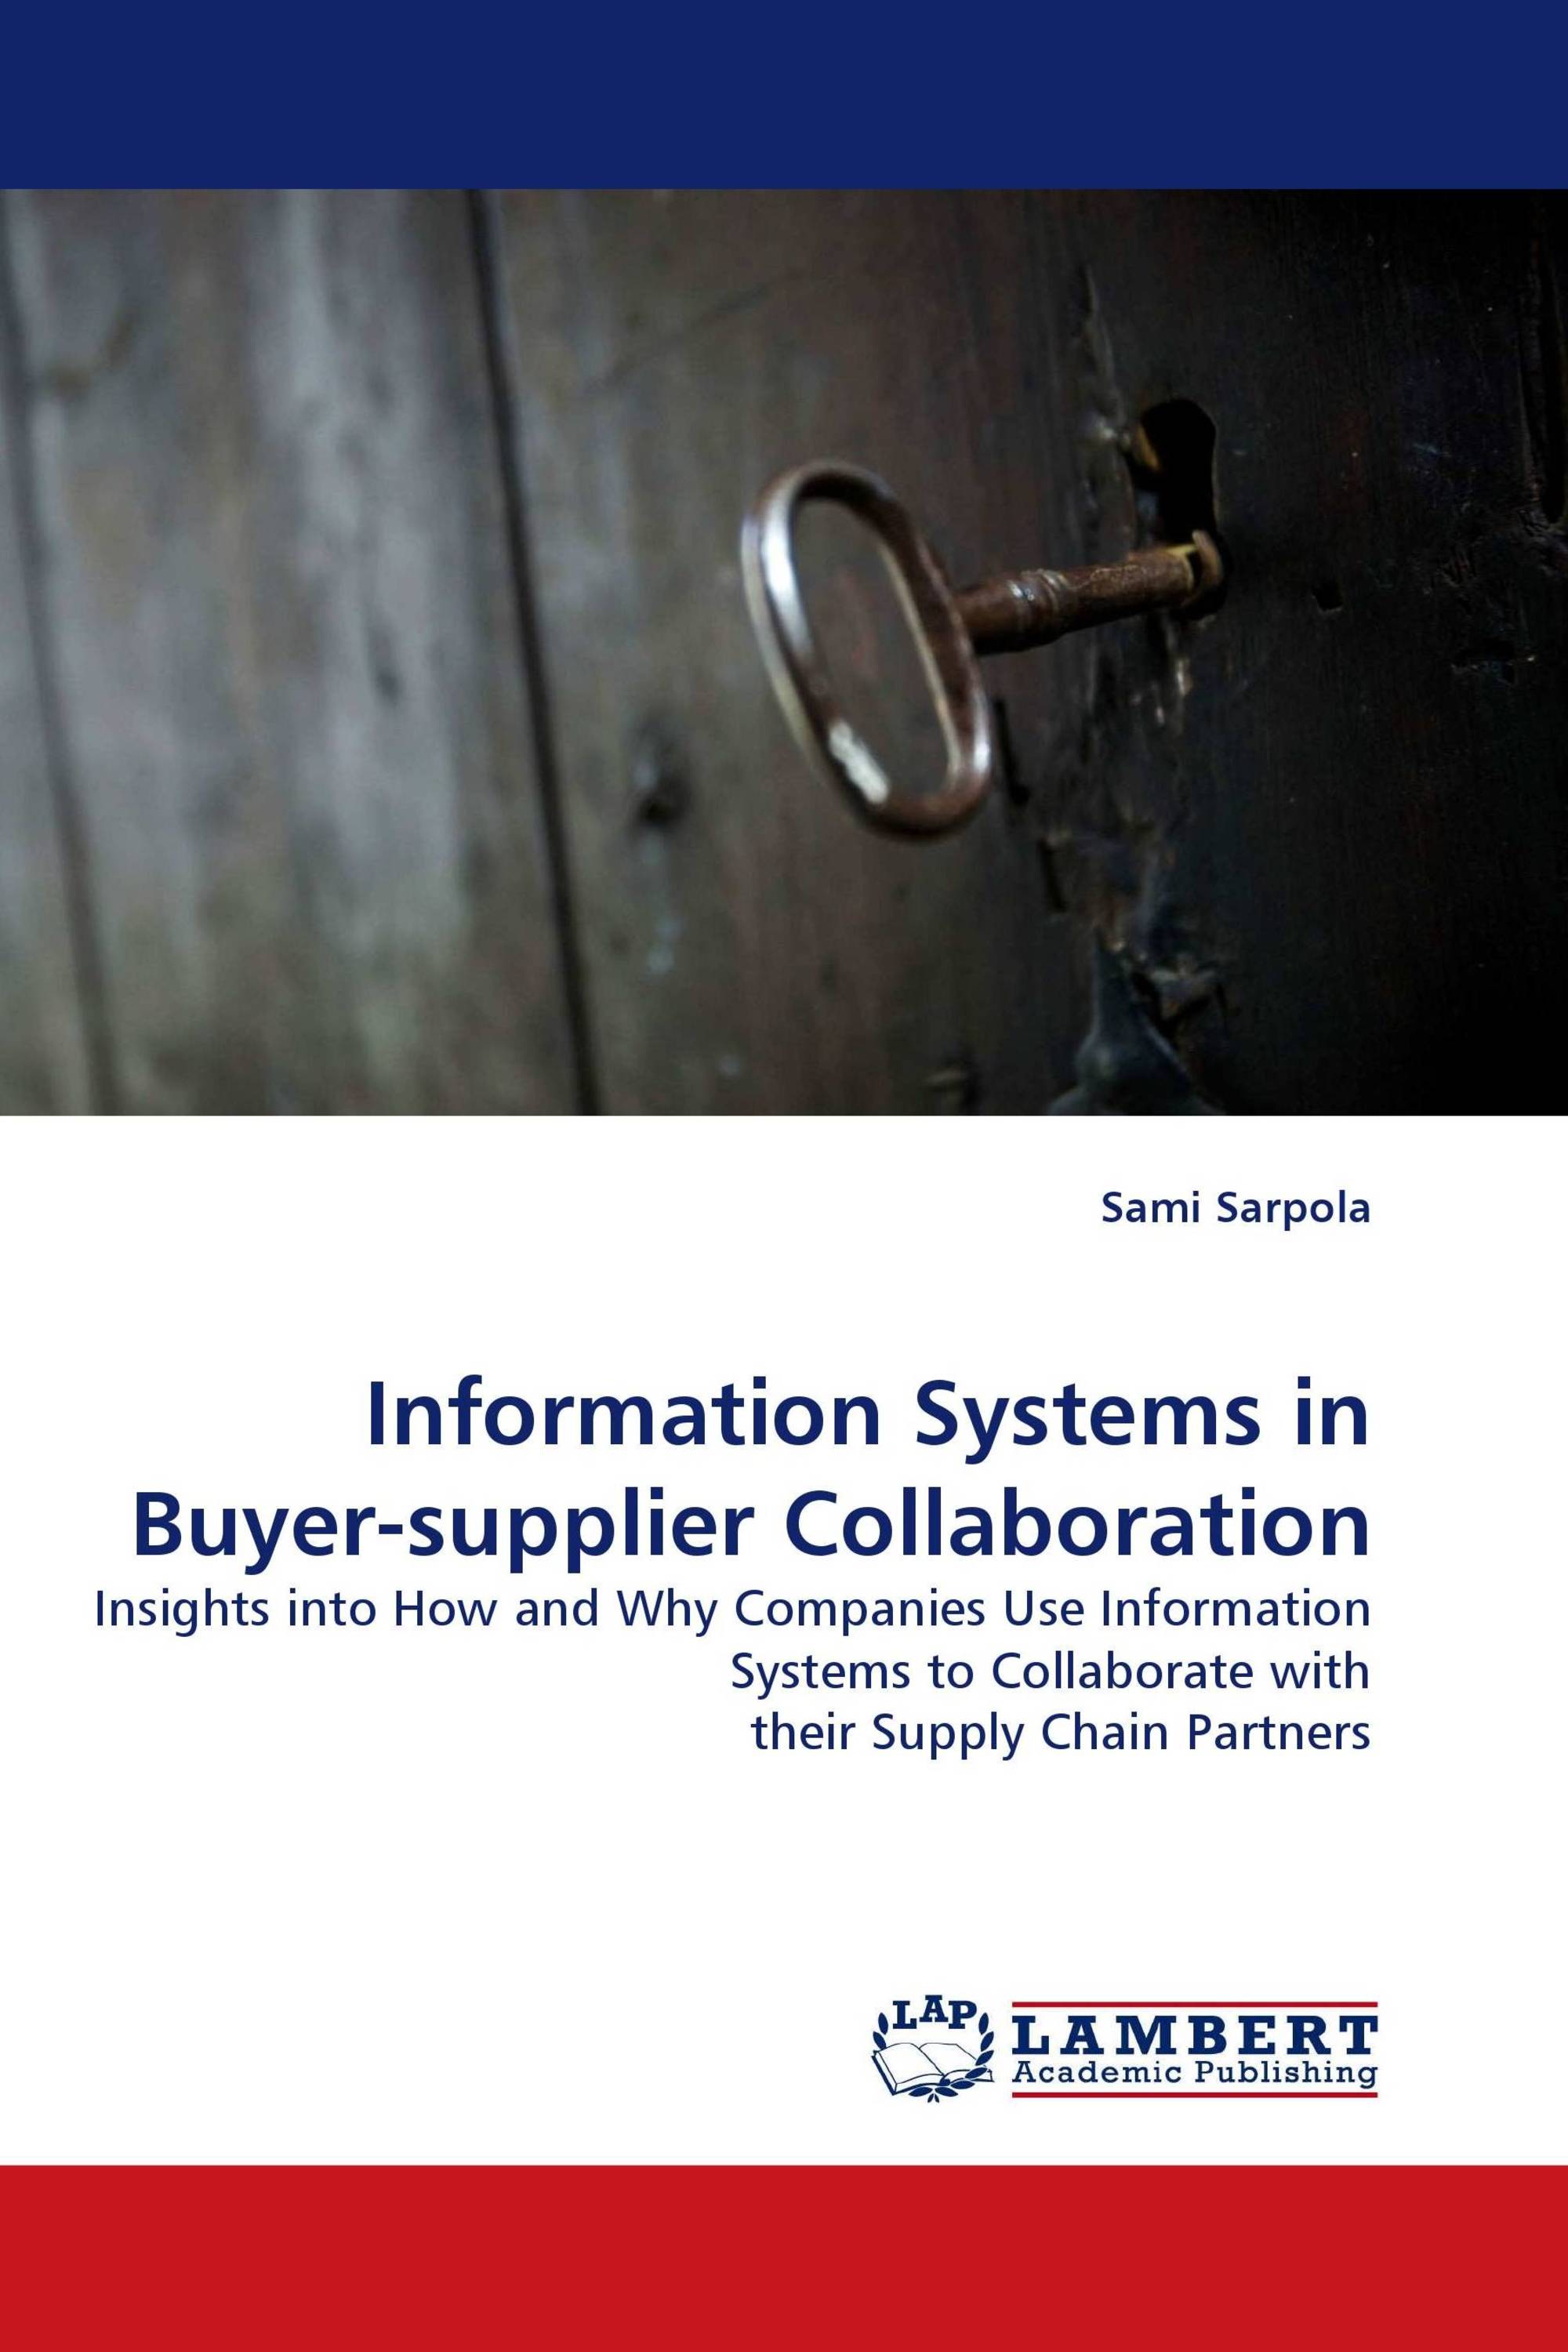 Information Systems in Buyer-supplier Collaboration